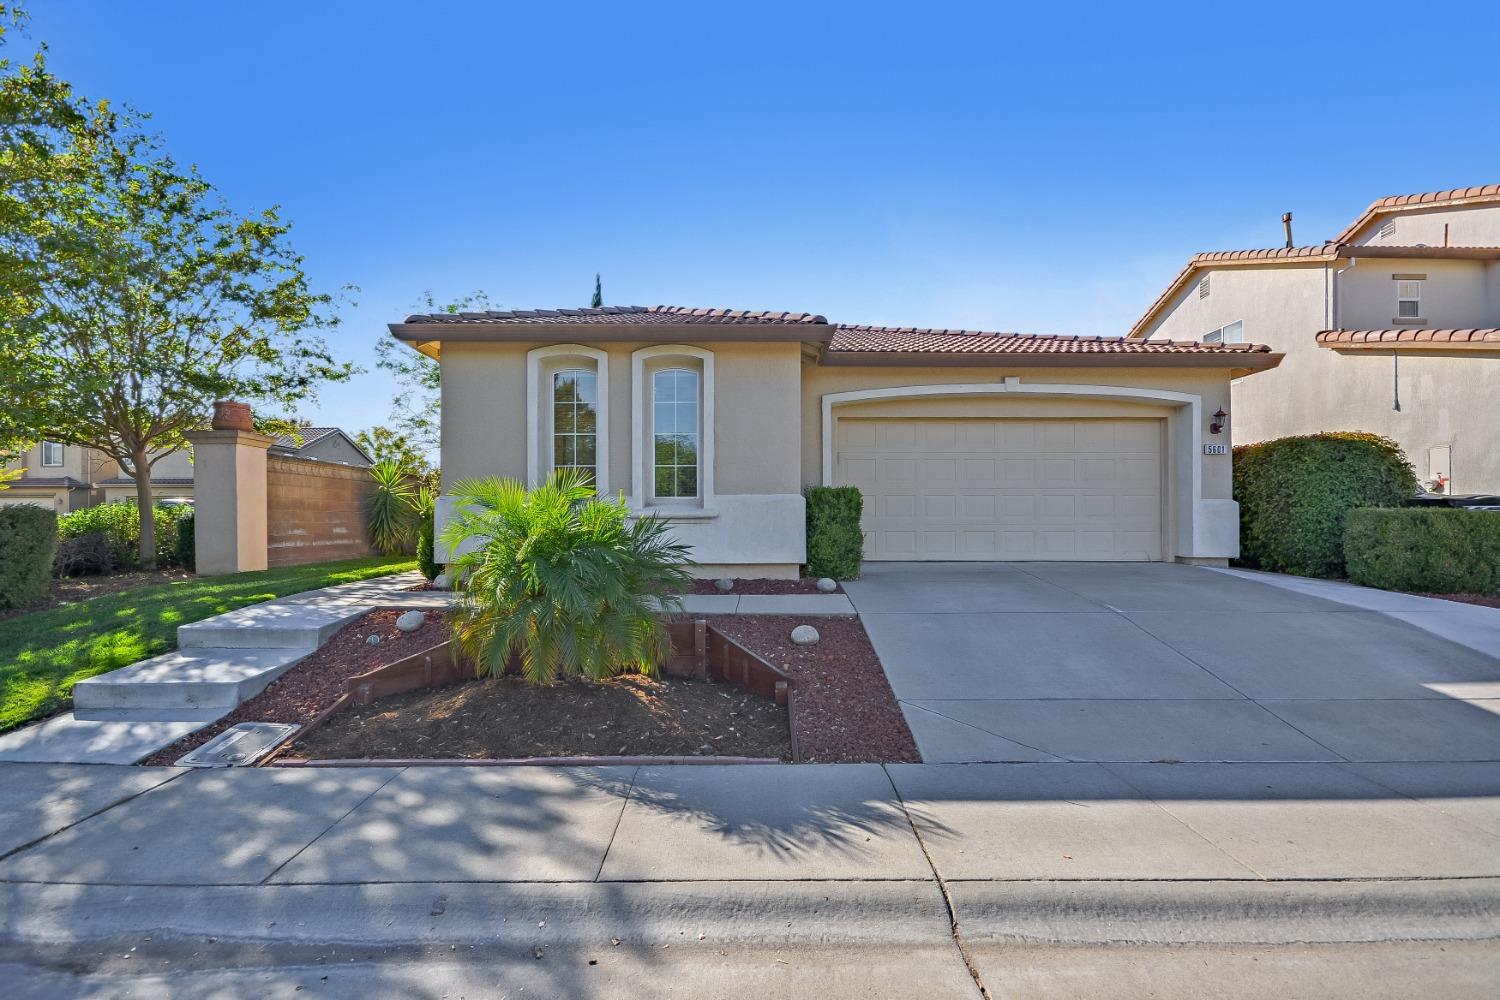 Step into WOW! This open floor plan single story North Natomas home is one you DO NOT want to miss o